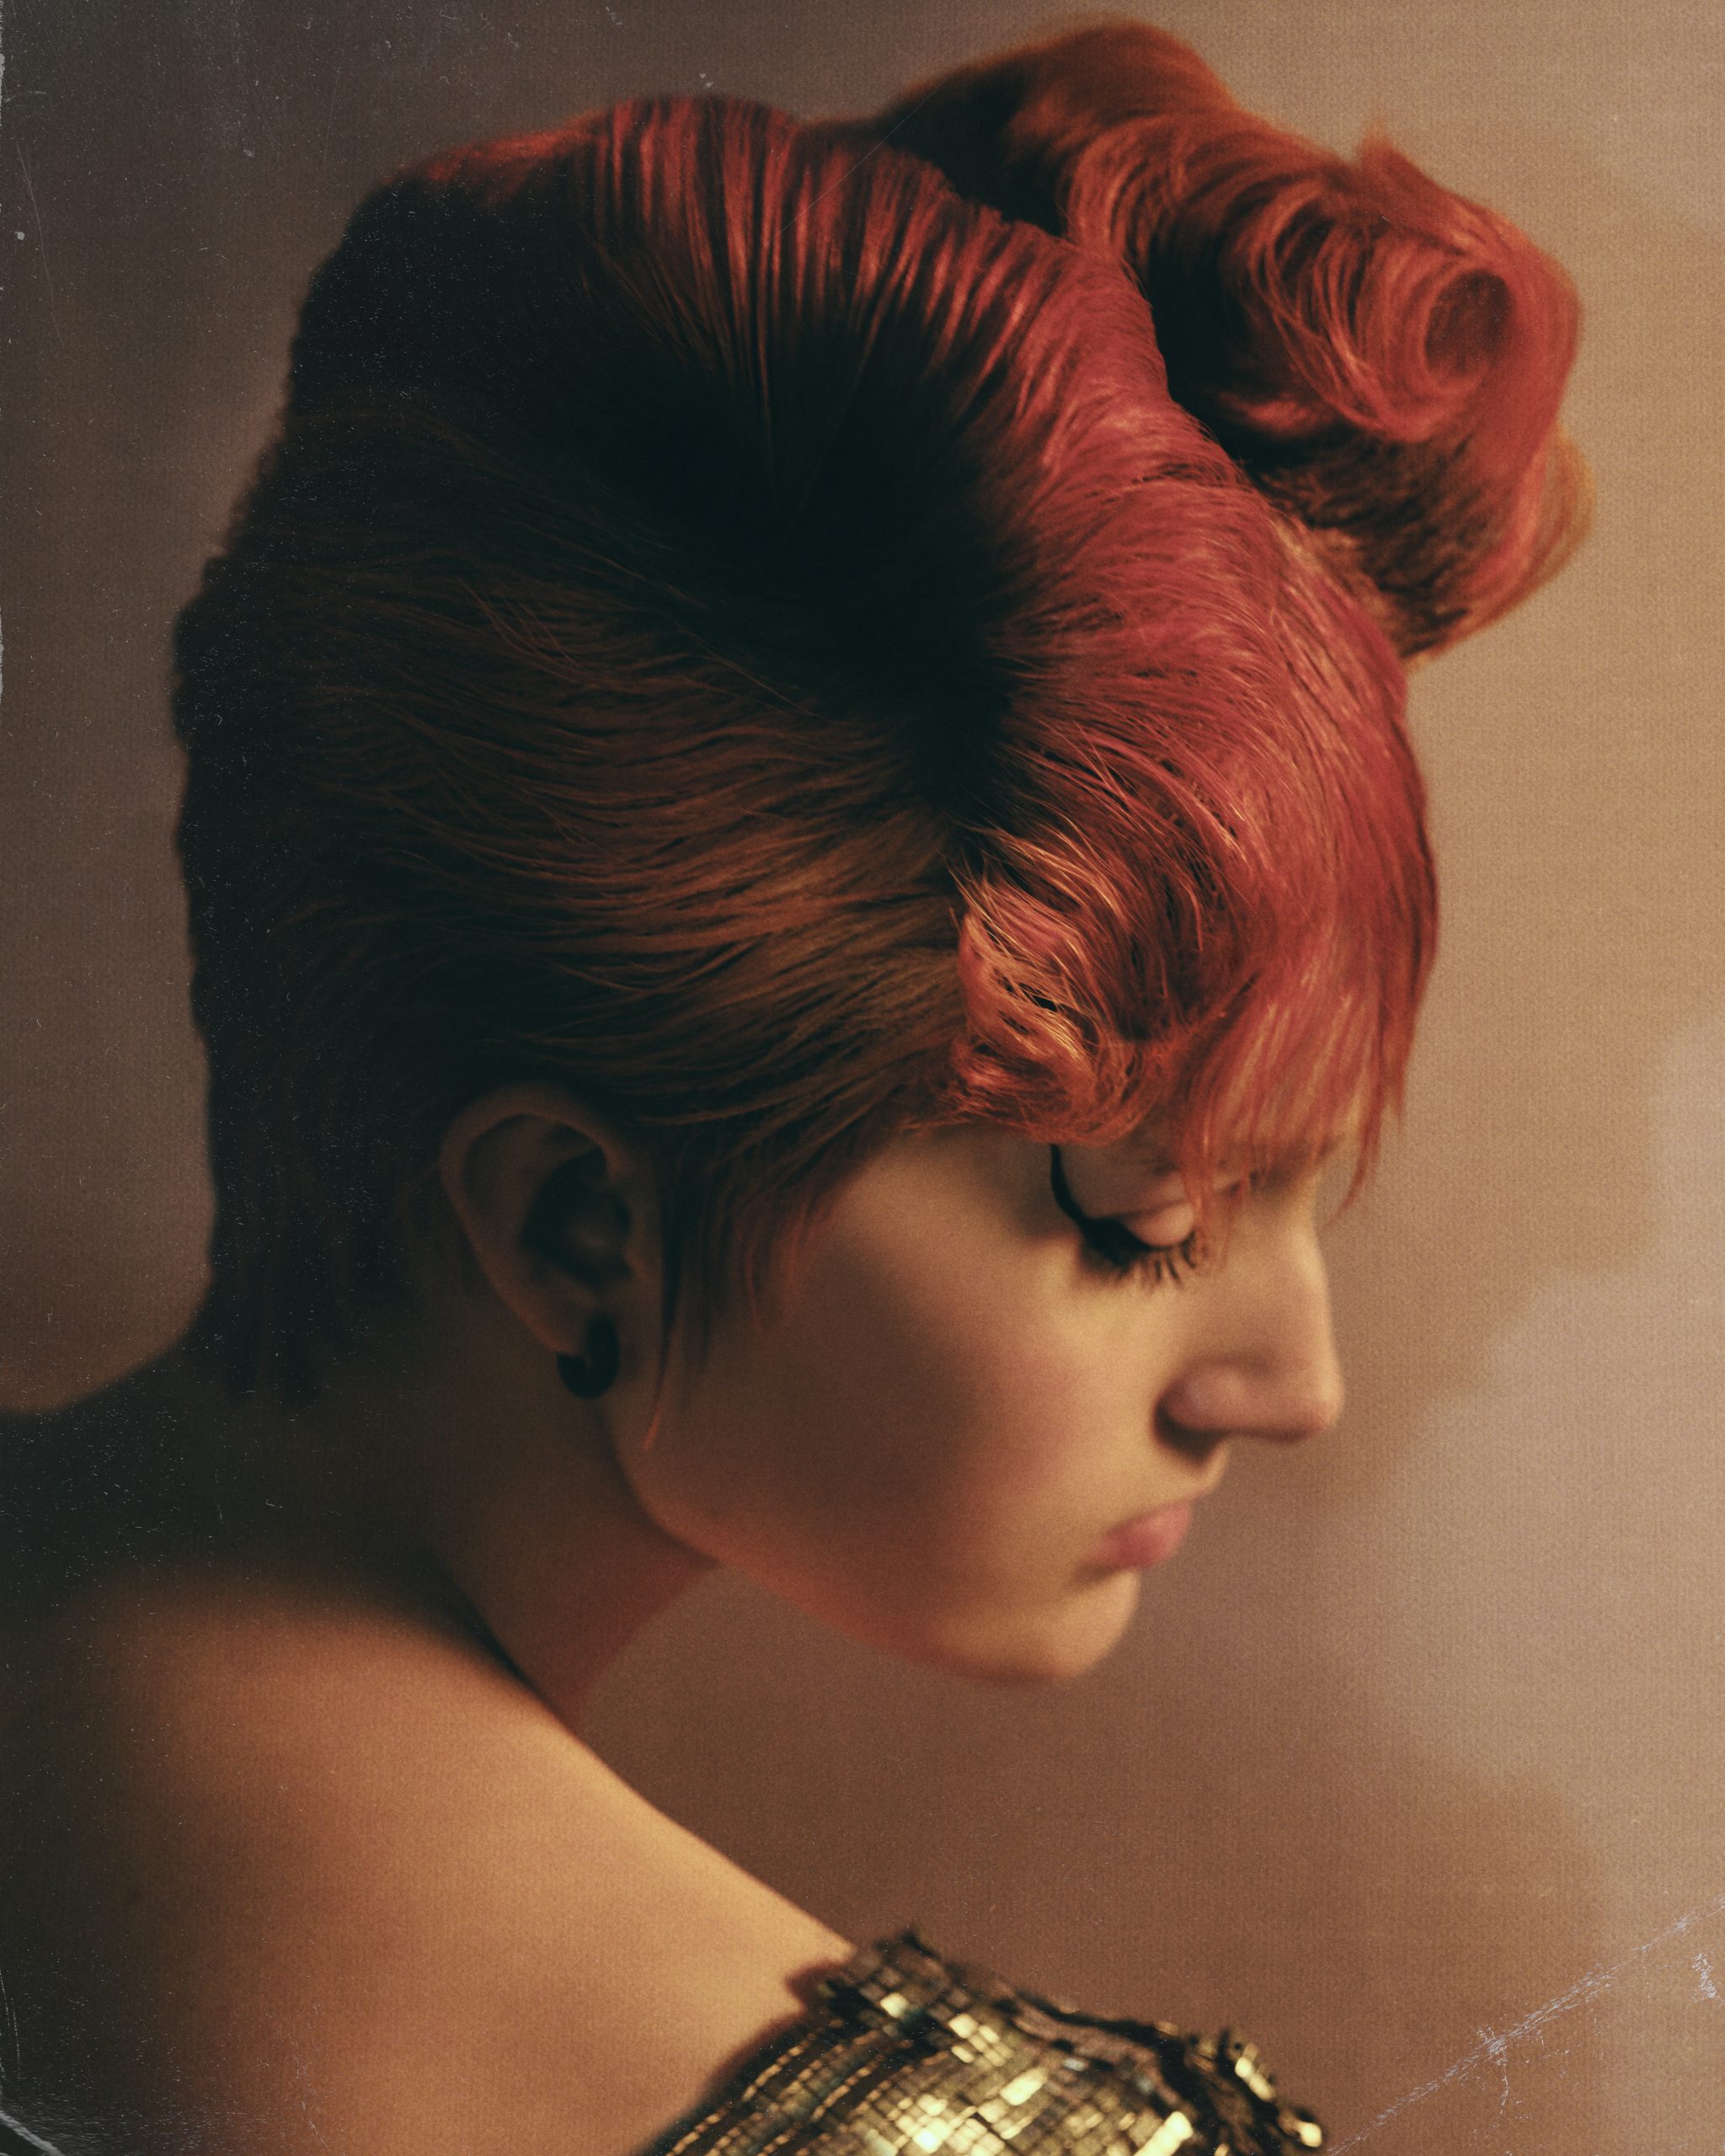 woman with red hair and black eyeliner in profile